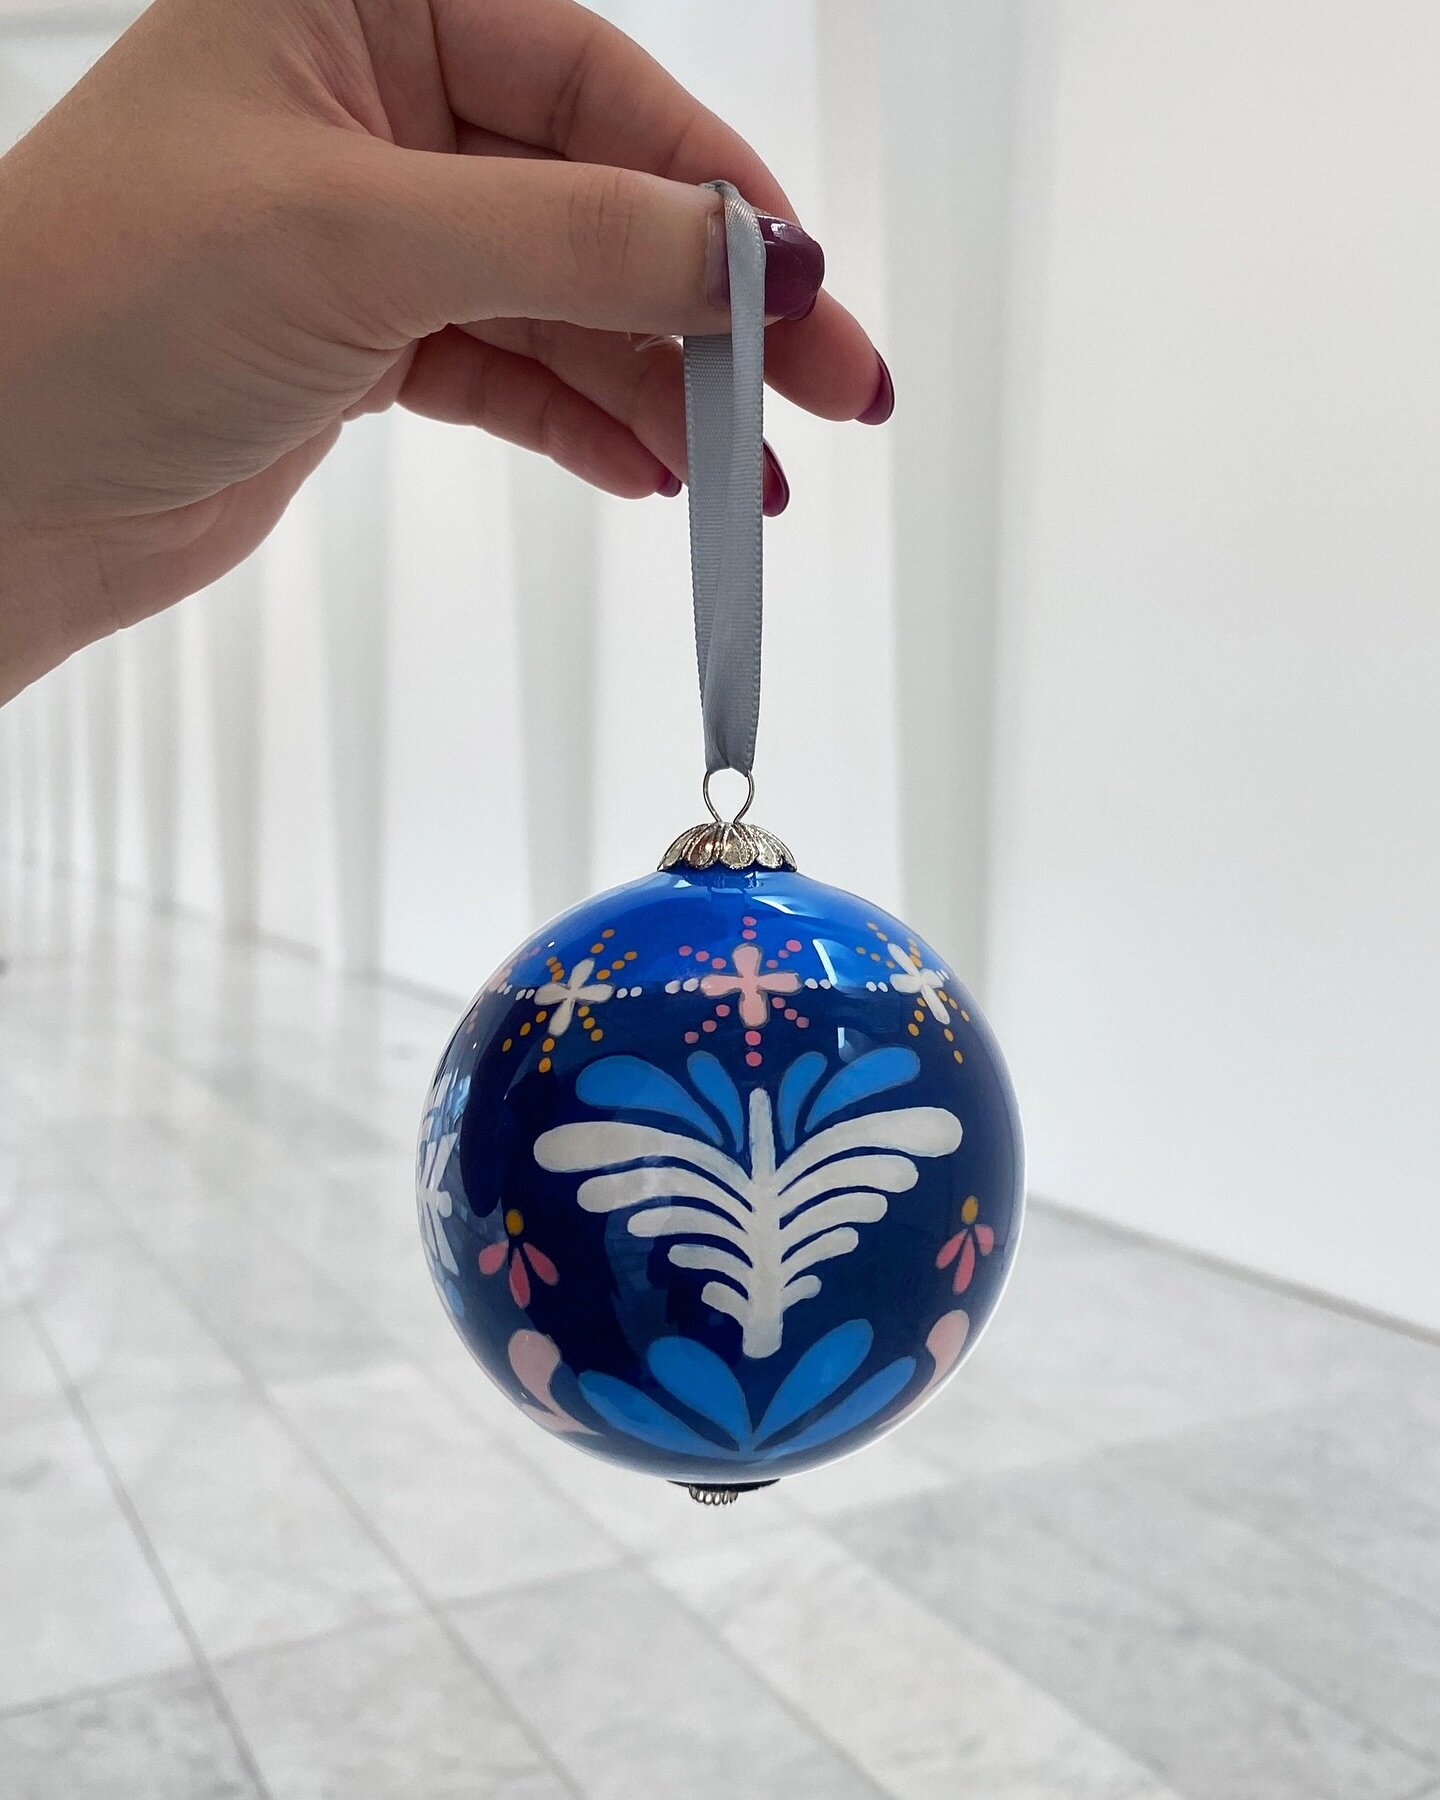 Hey Milwaukee folks! I will be at @milwaukeeart on 11/26 &amp; 12/14 signing holiday ornaments. Please drop by and say hello 😍💕 

If you&rsquo;re unable to make the events you can also purchase the holiday ornament online and in-store 💕❄️